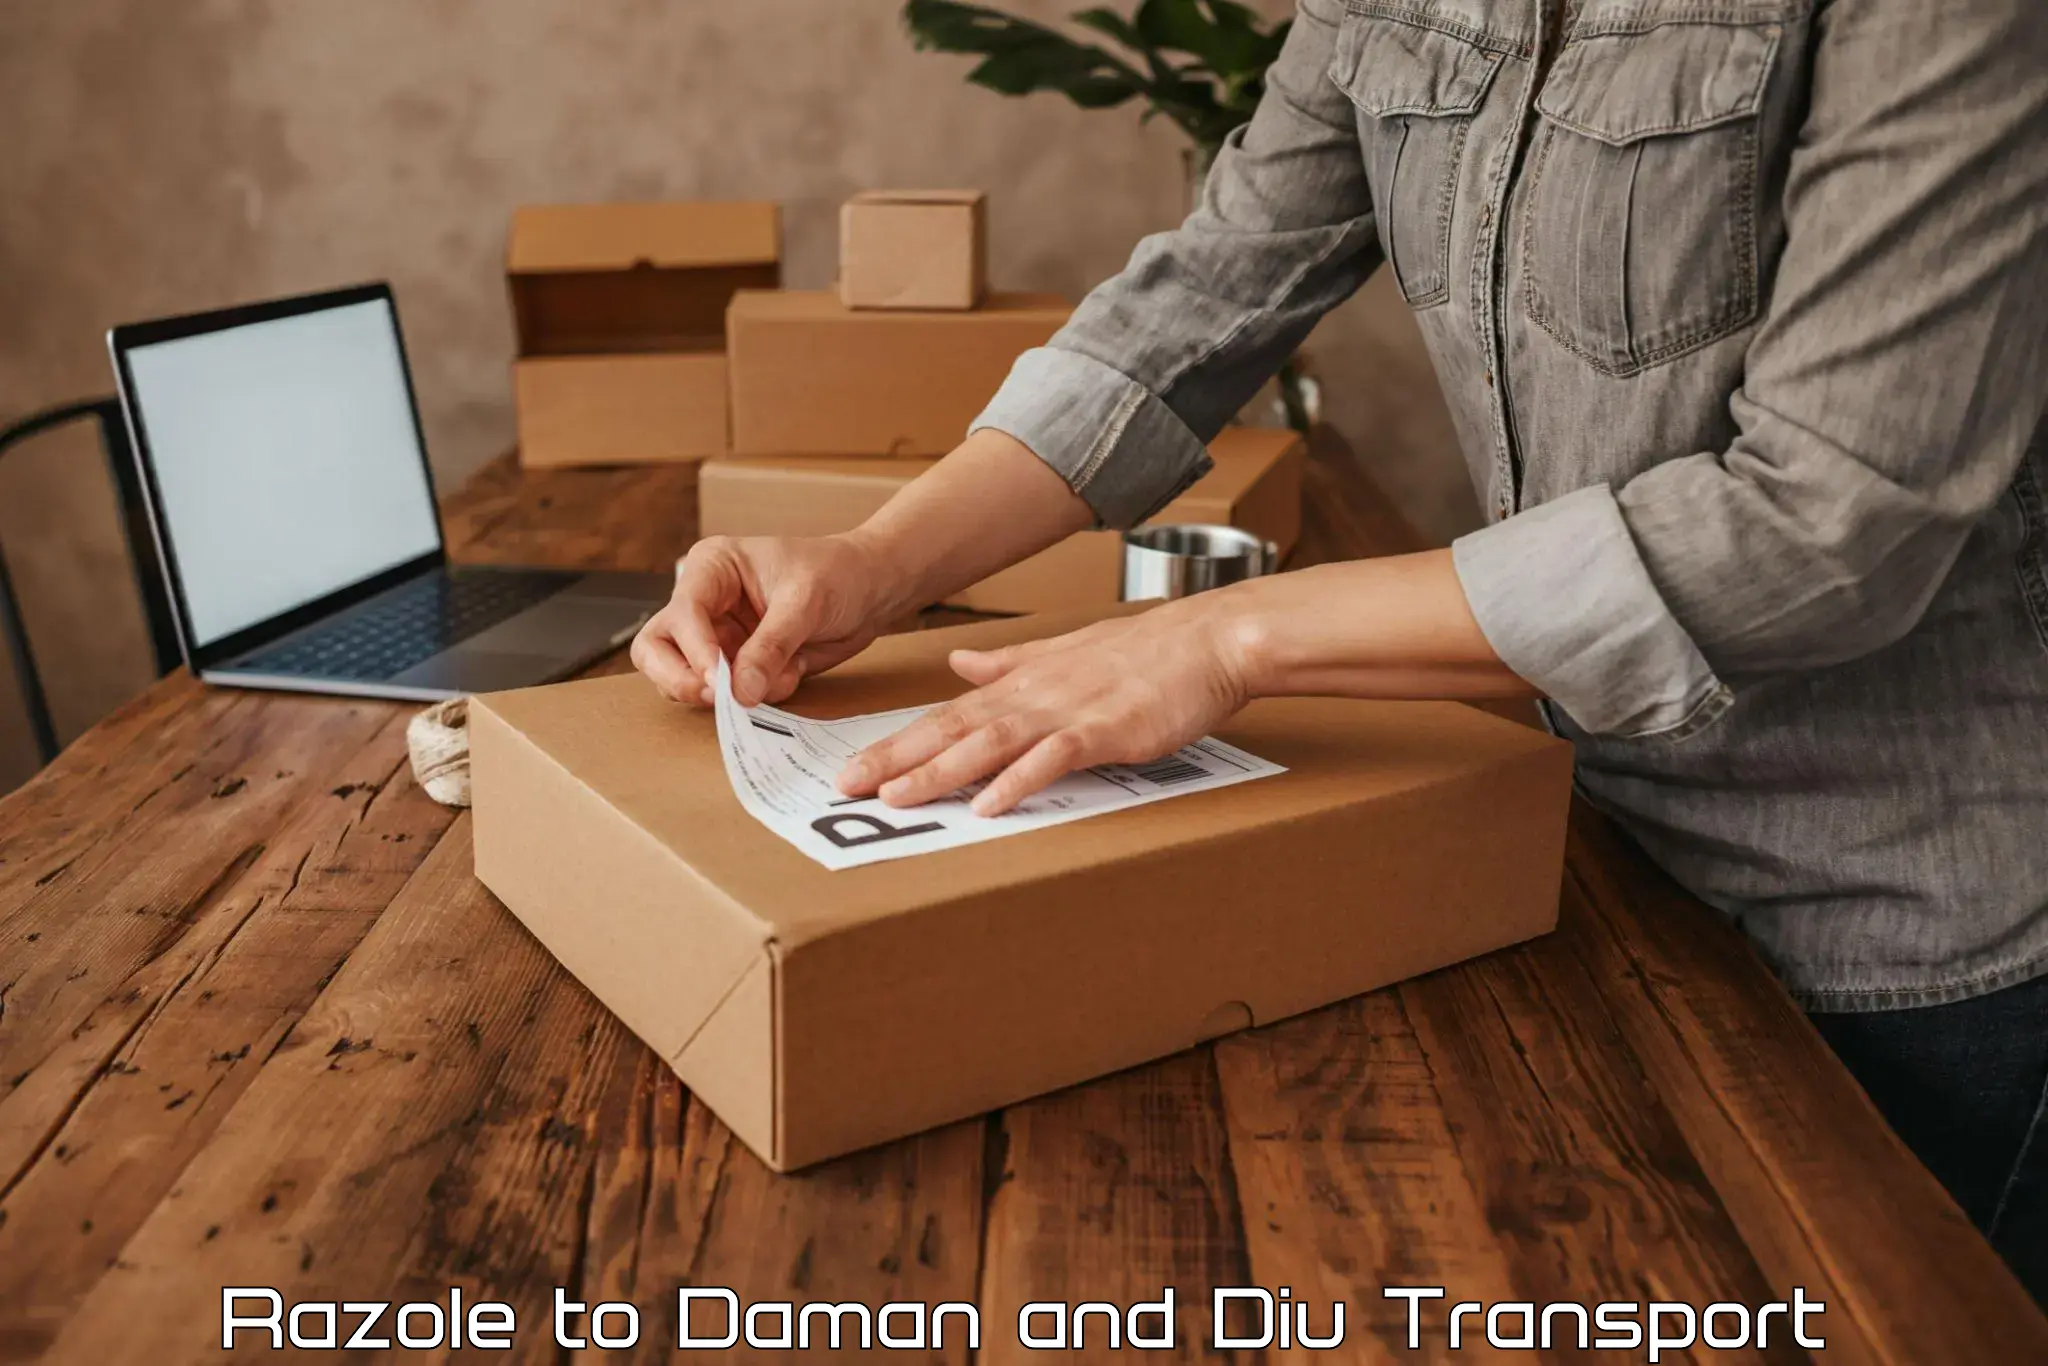 Transport shared services Razole to Daman and Diu